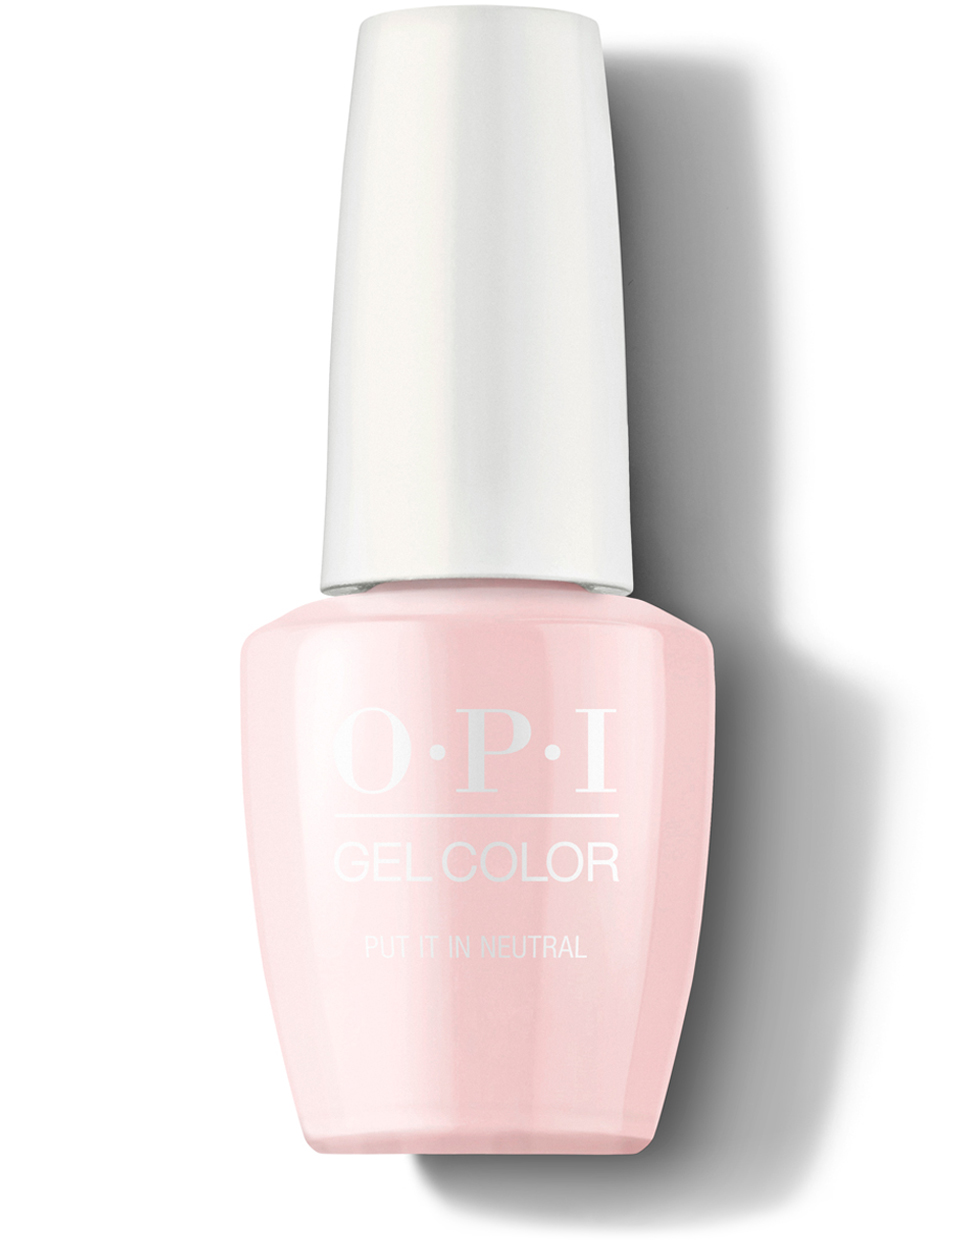 Put It In Neutral - GelColor | OPI